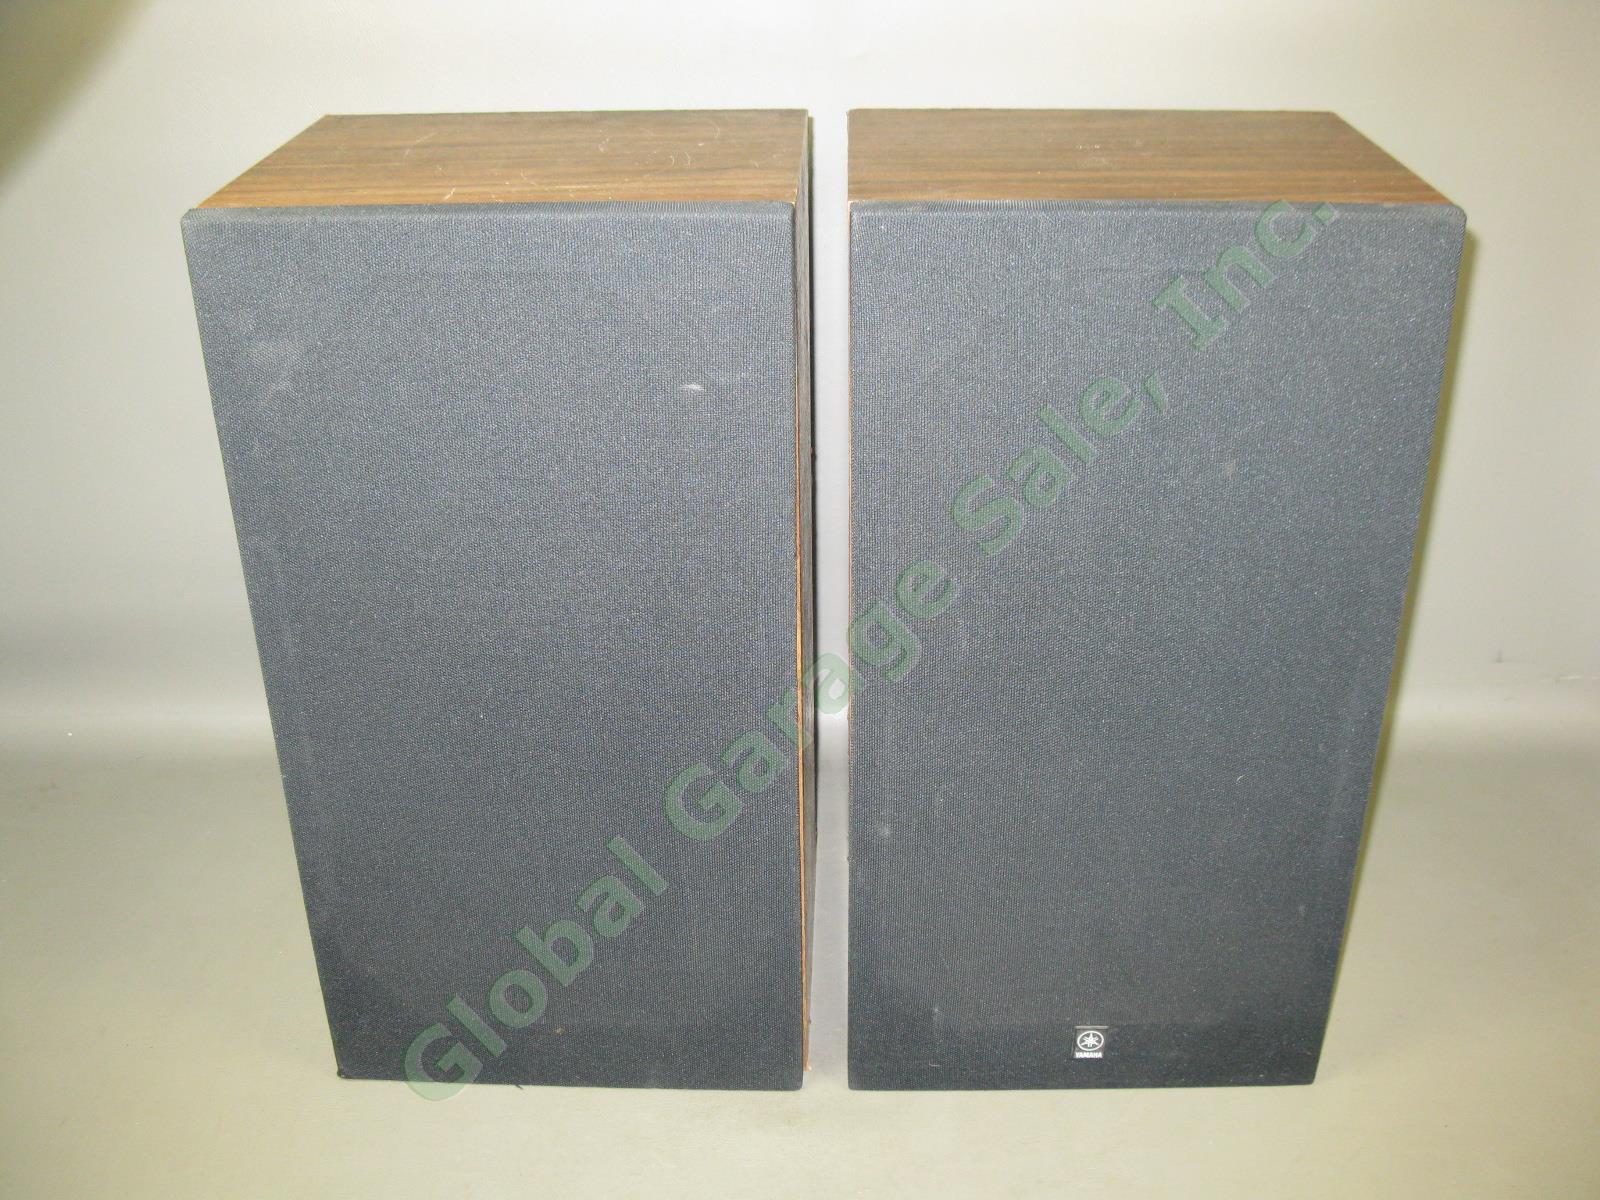 Vtg Yamaha NS-4 Audio Stereo Speakers Pair Set Lot Consecutive Serial Numbers NR 3